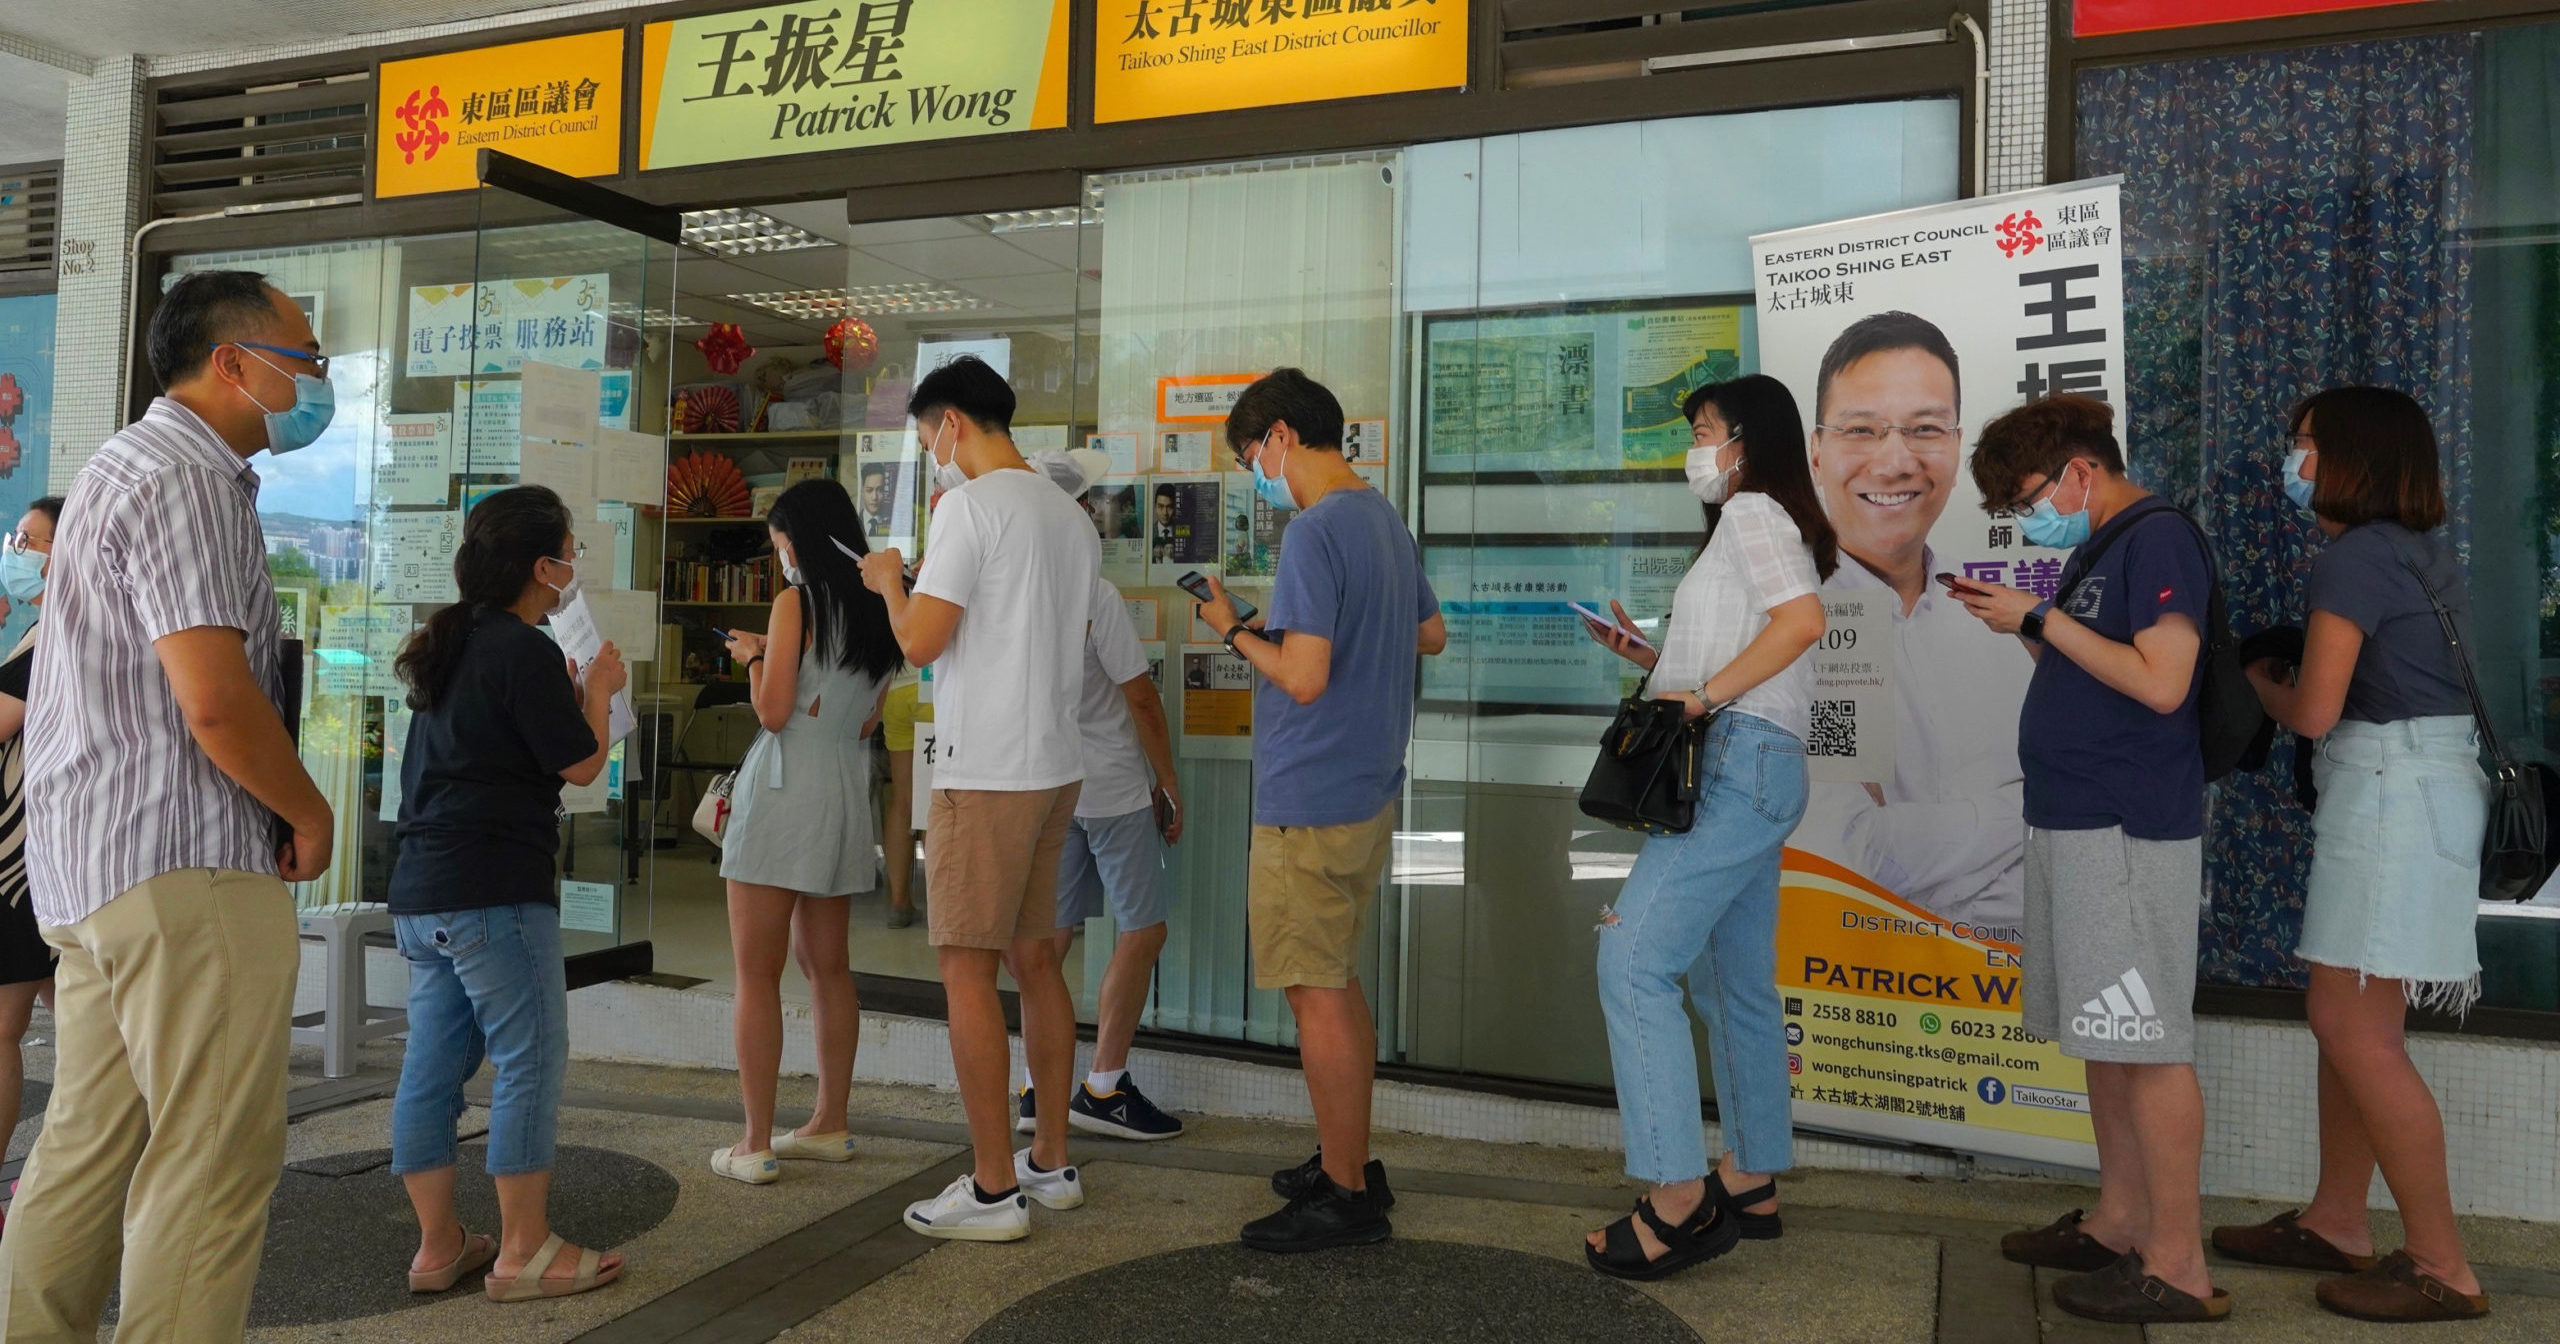 People queue up to vote in Hong Kong on July 12, 2020, in an unofficial primary for pro-democracy candidates ahead of legislative elections in September. Over 200,000 Hong Kongers voted in an unofficial Hong Kong primary that will help the pro-democracy camp decide which candidates to field in legislative elections in September. The turnout exceeded organizers' estimates that some 170,000 people would turn up to vote over the weekend.